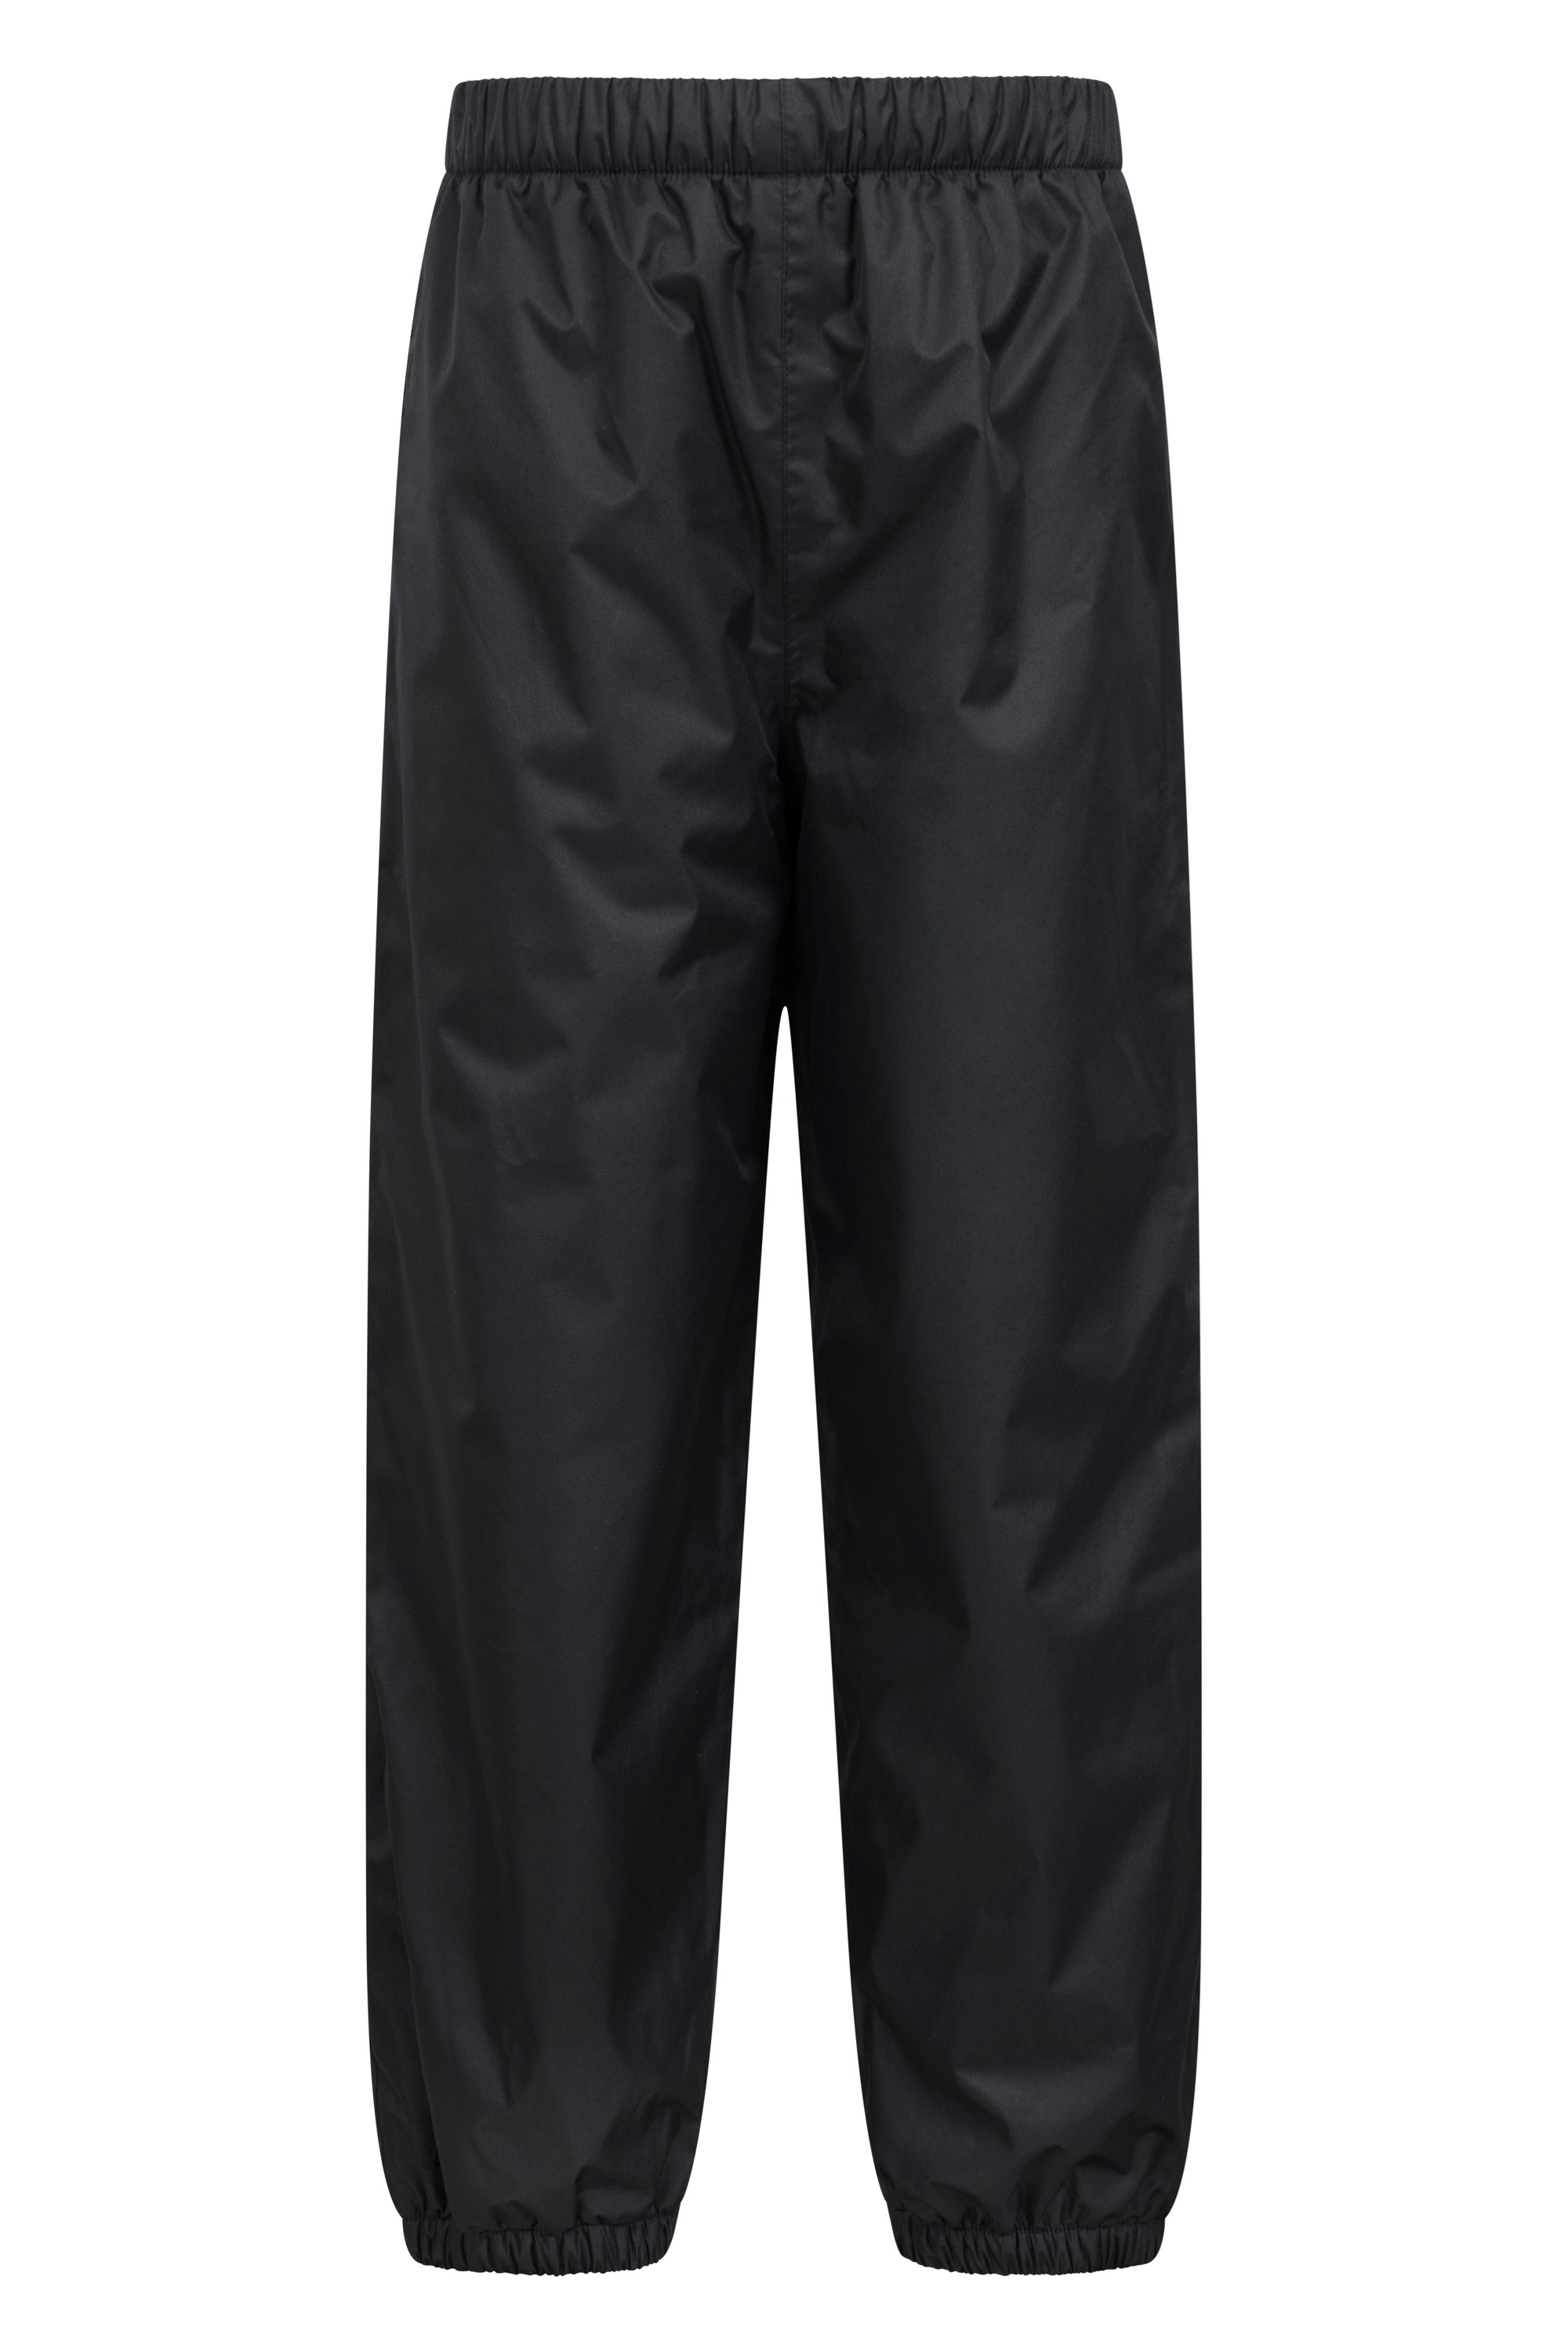 Buy Black Trousers & Pants for Boys by THE CHILDREN'S PLACE Online |  Ajio.com